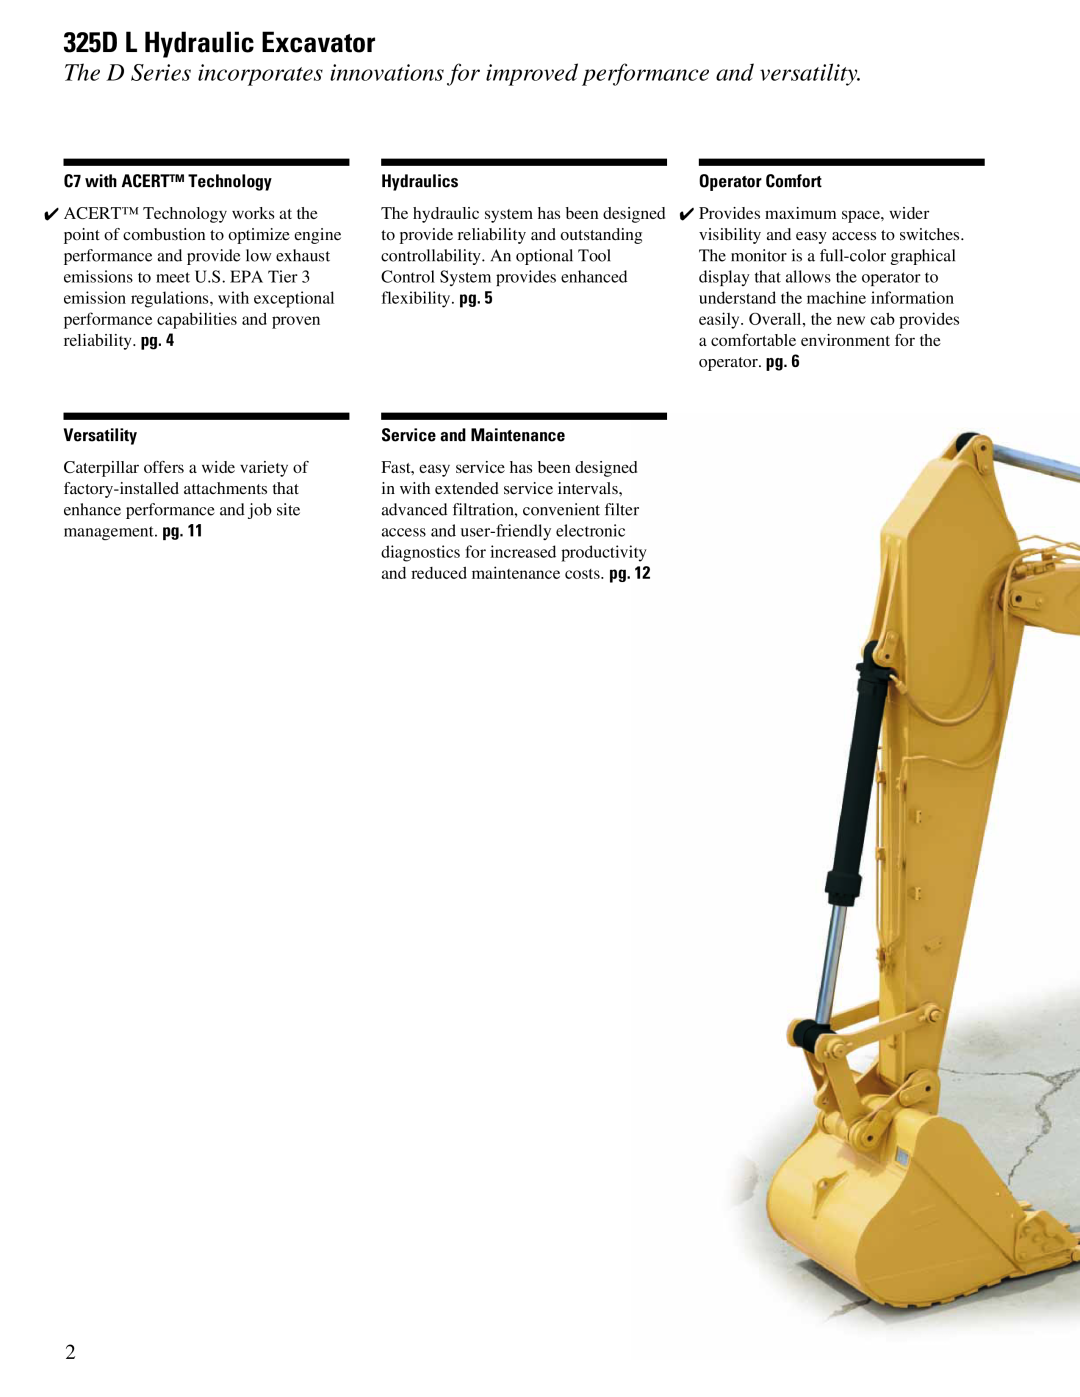 CAT 325DL manual 325D L Hydraulic Excavator, C7 with ACERT Technology, Hydraulics, Versatility, Service and Maintenance 